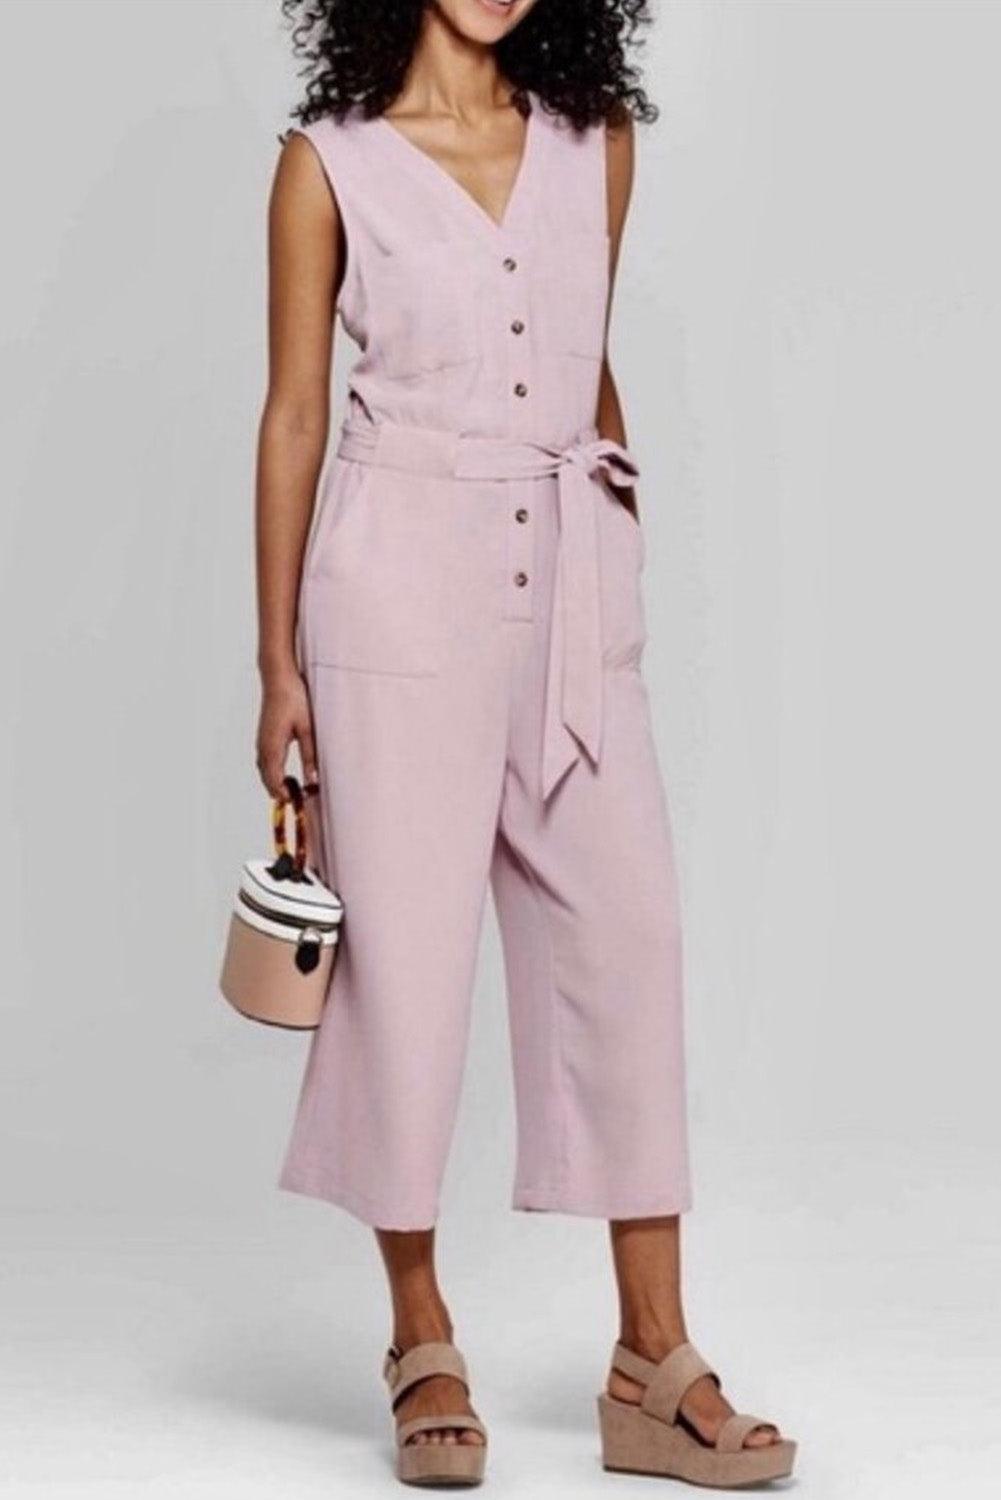 Pink Buttoned Sleeveless Cropped Jumpsuit With Sash - Vesteeto